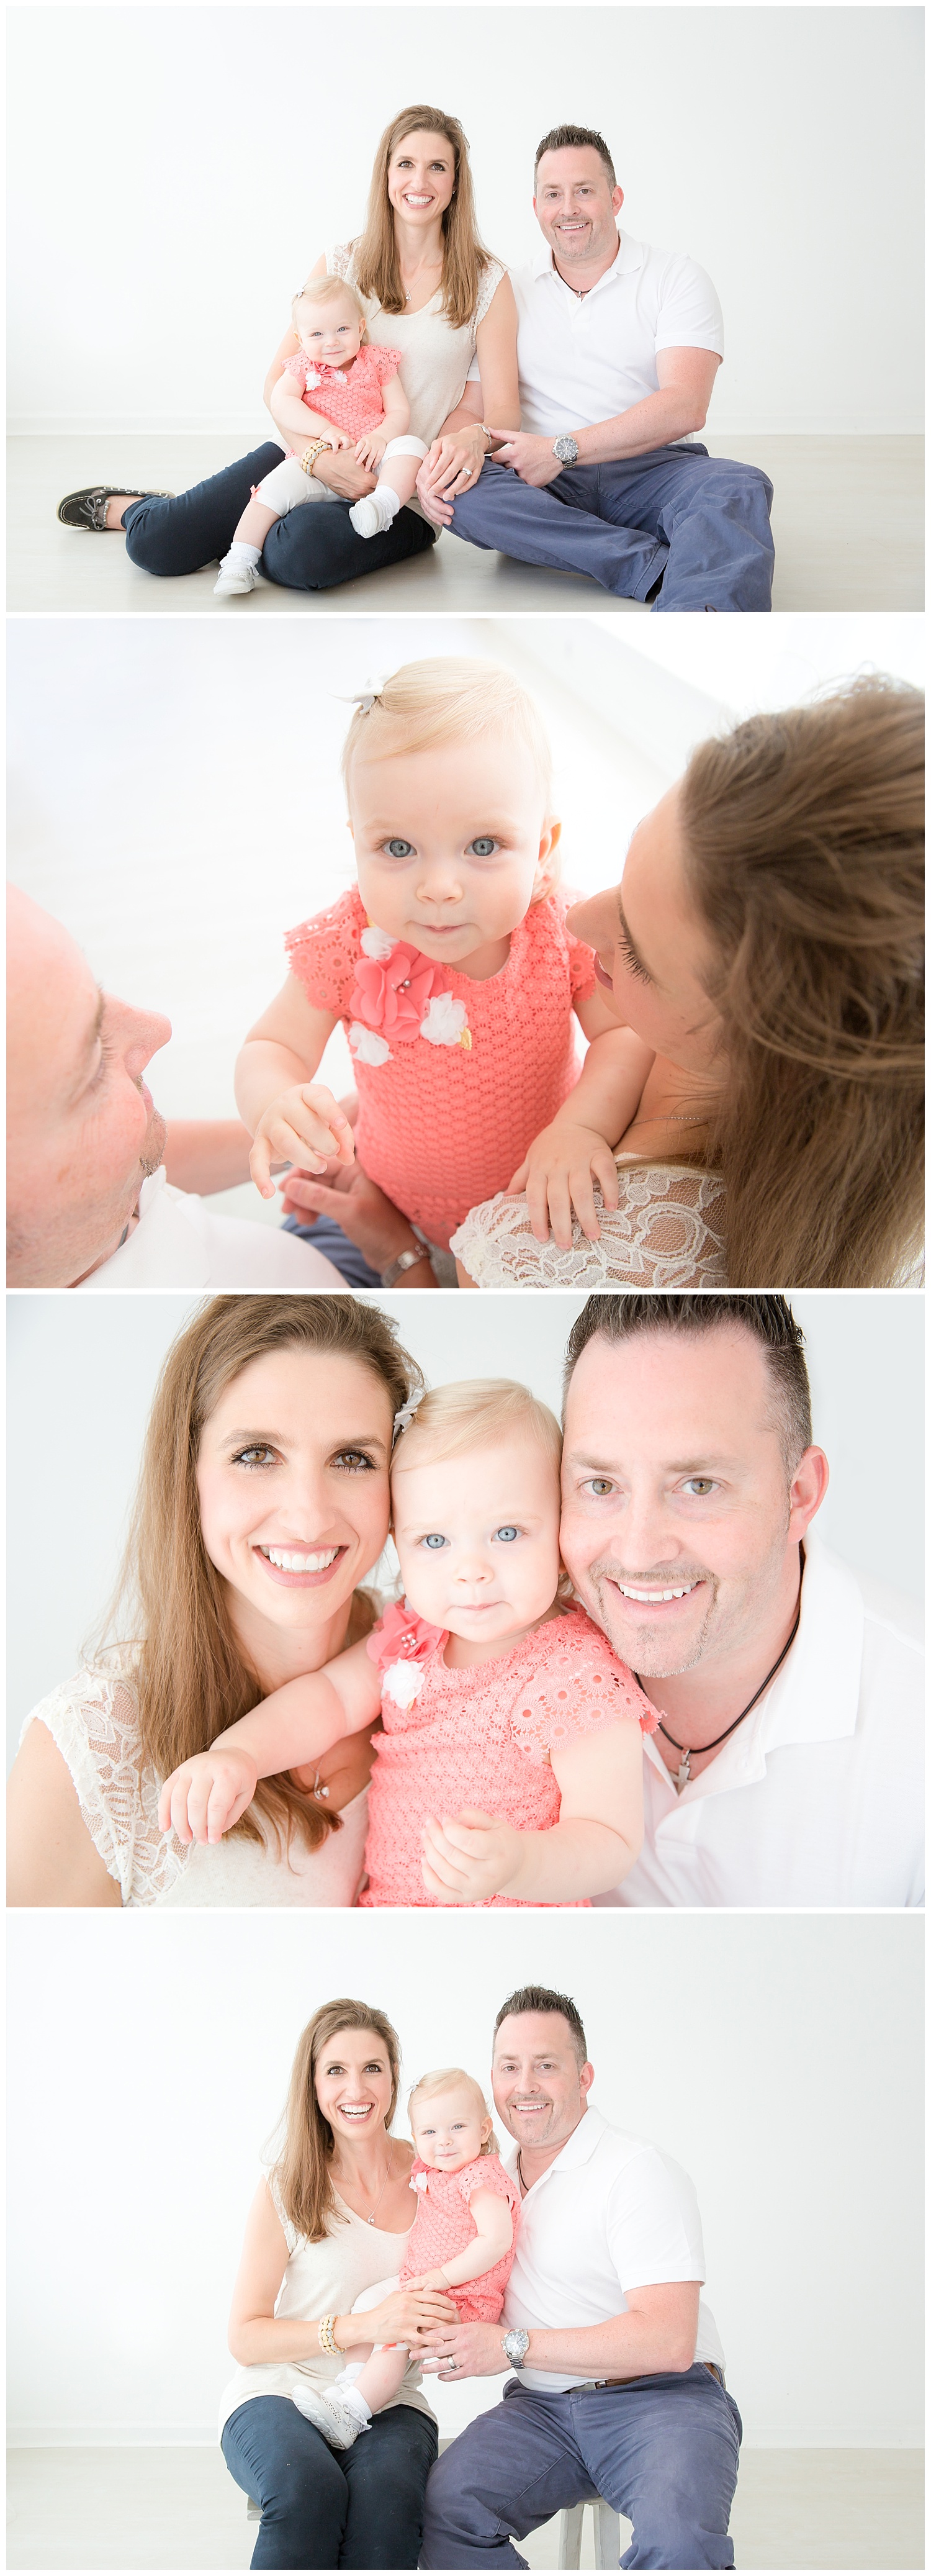 mom and dad snuggling their little girl who is wearing pink in moorestown new jersey photo studio